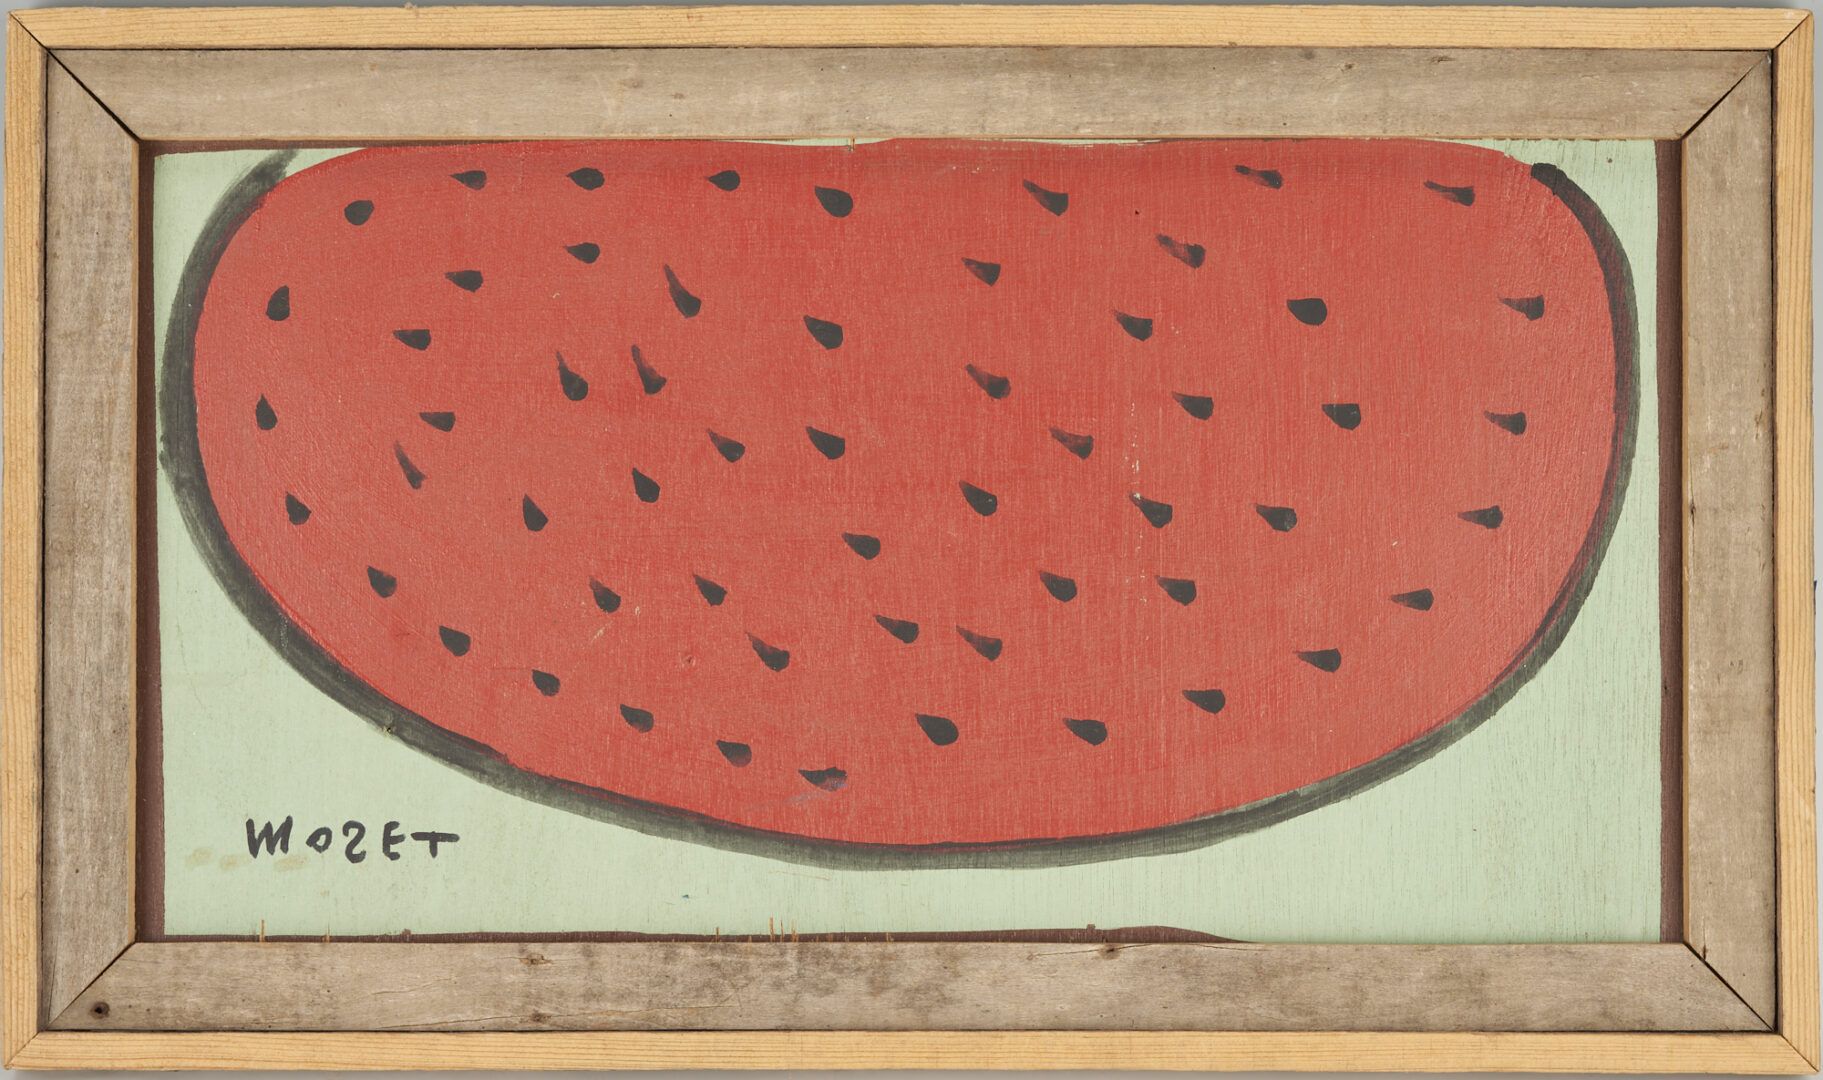 Lot 19: Mose Tolliver Watermelon Painting